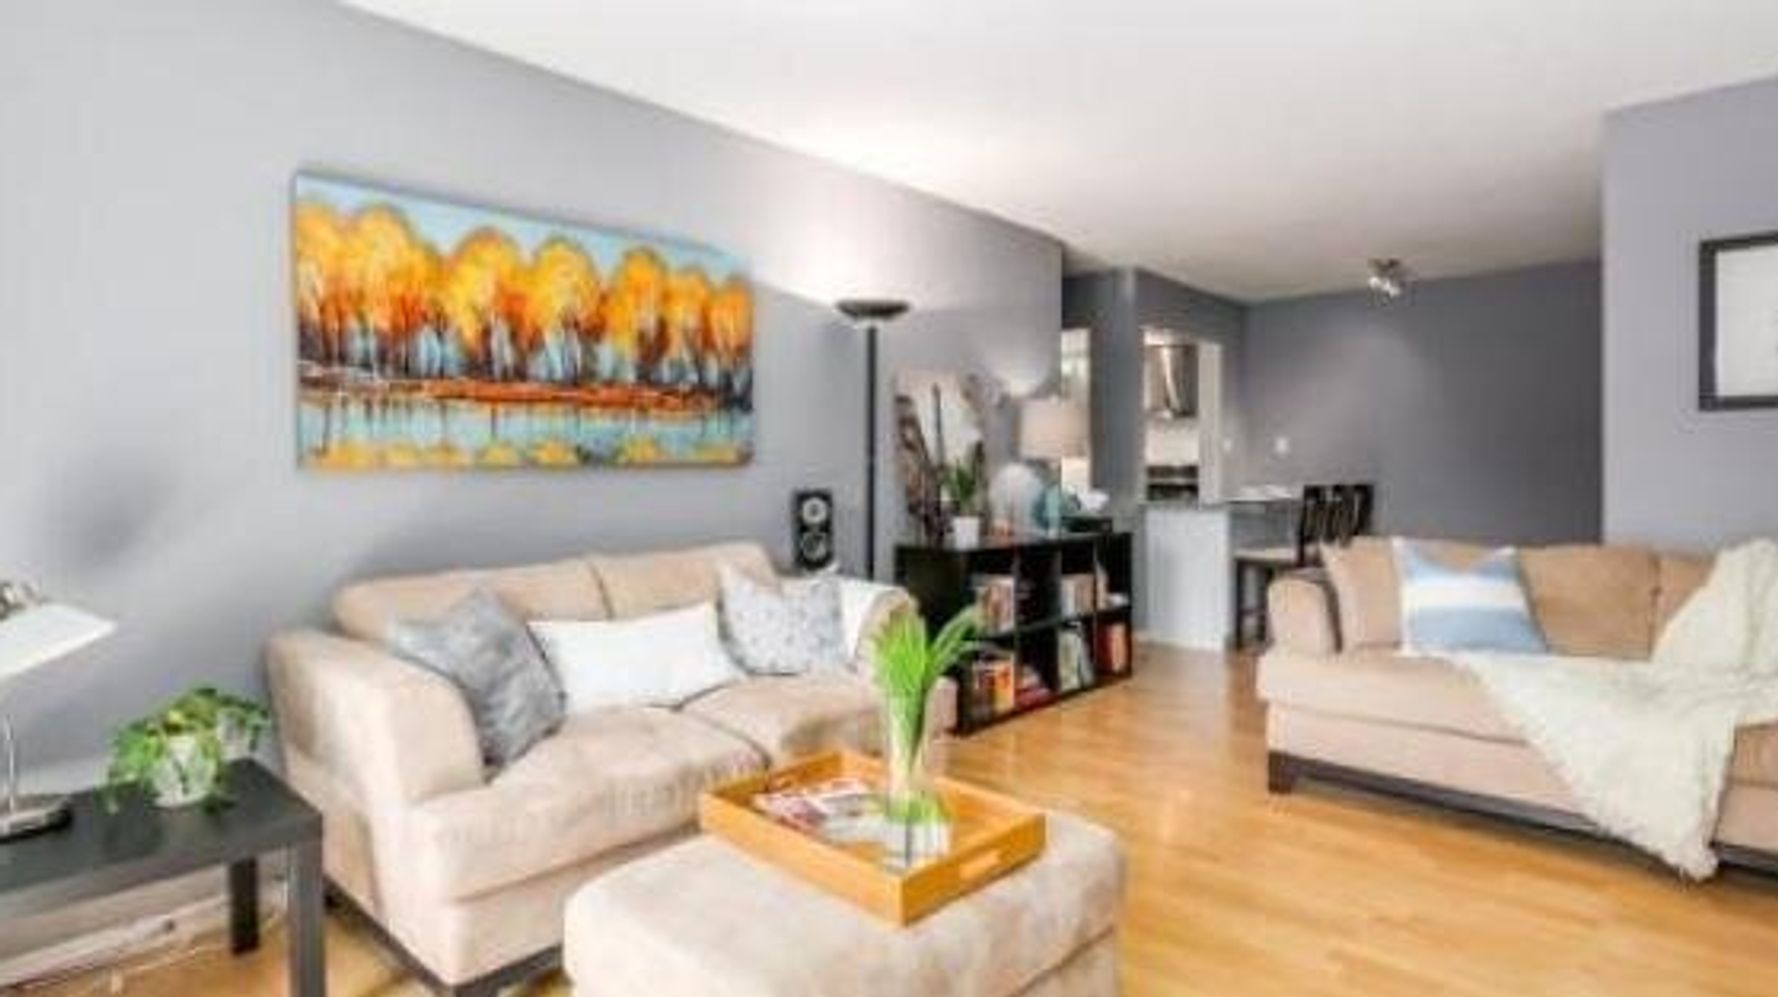 Attractive Vancouver Condos For $300,000 Or Less Actually Exist ...